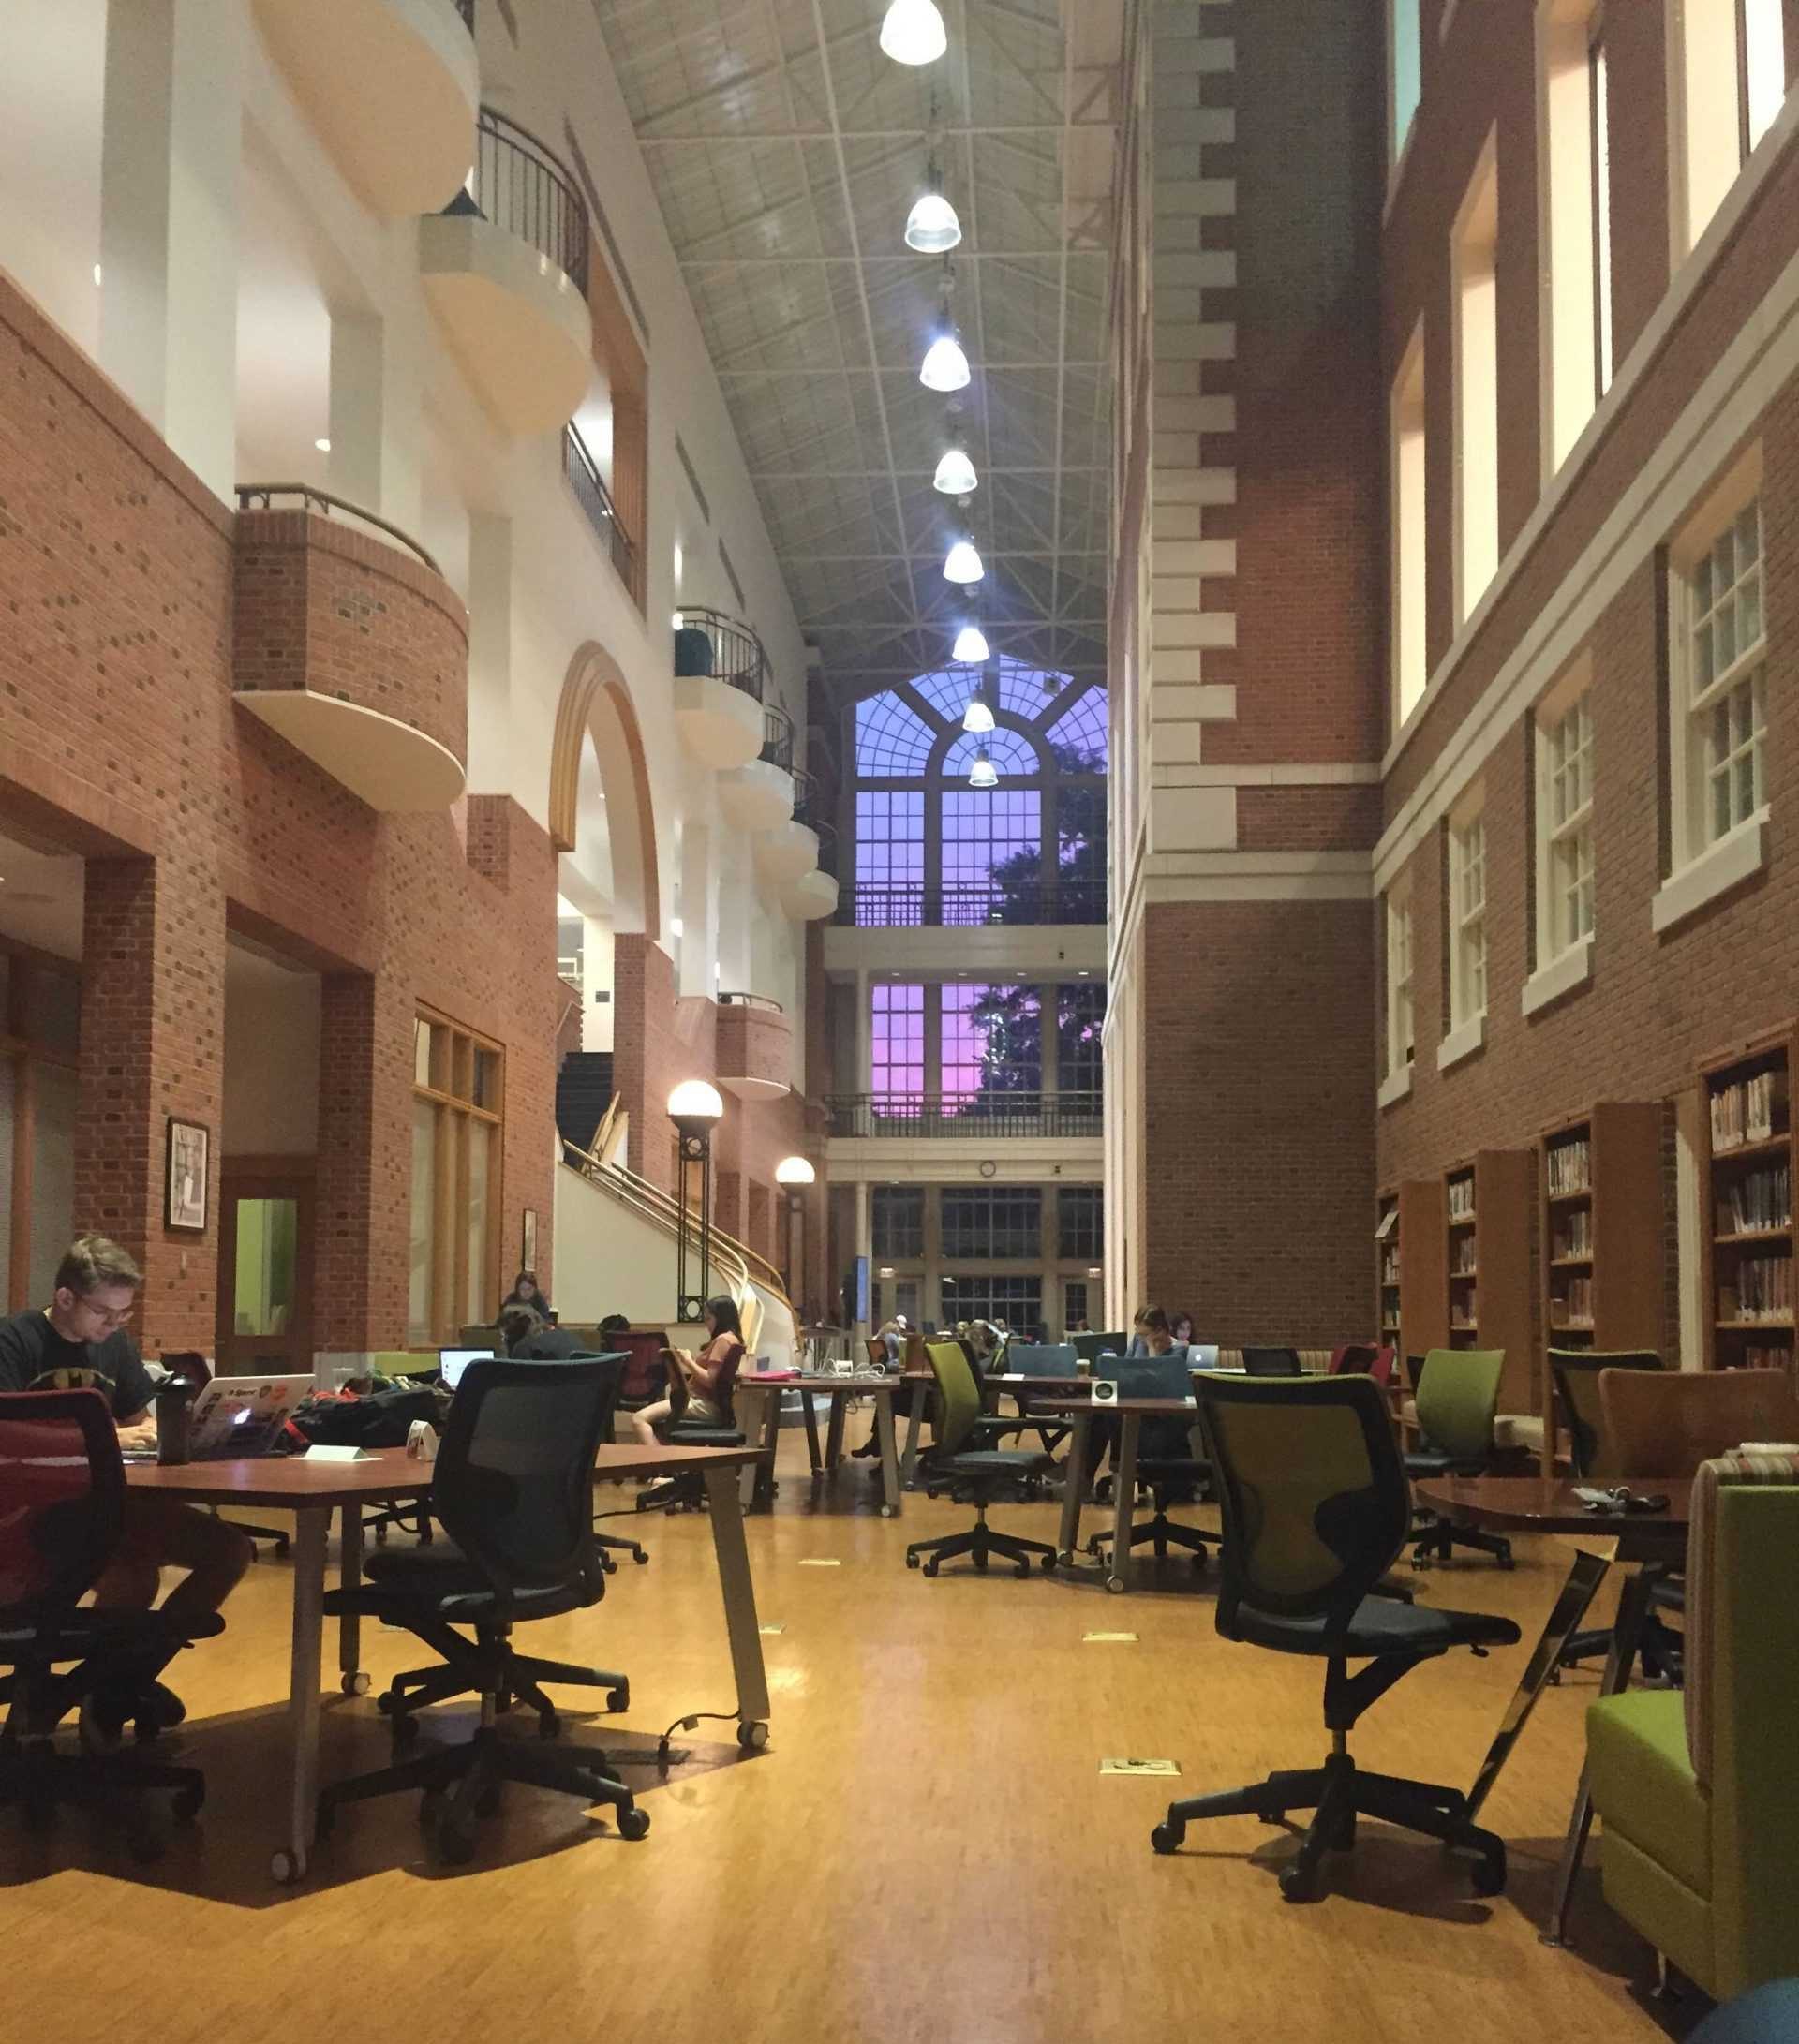 The first floor of ZSR library as pictured in 2016.